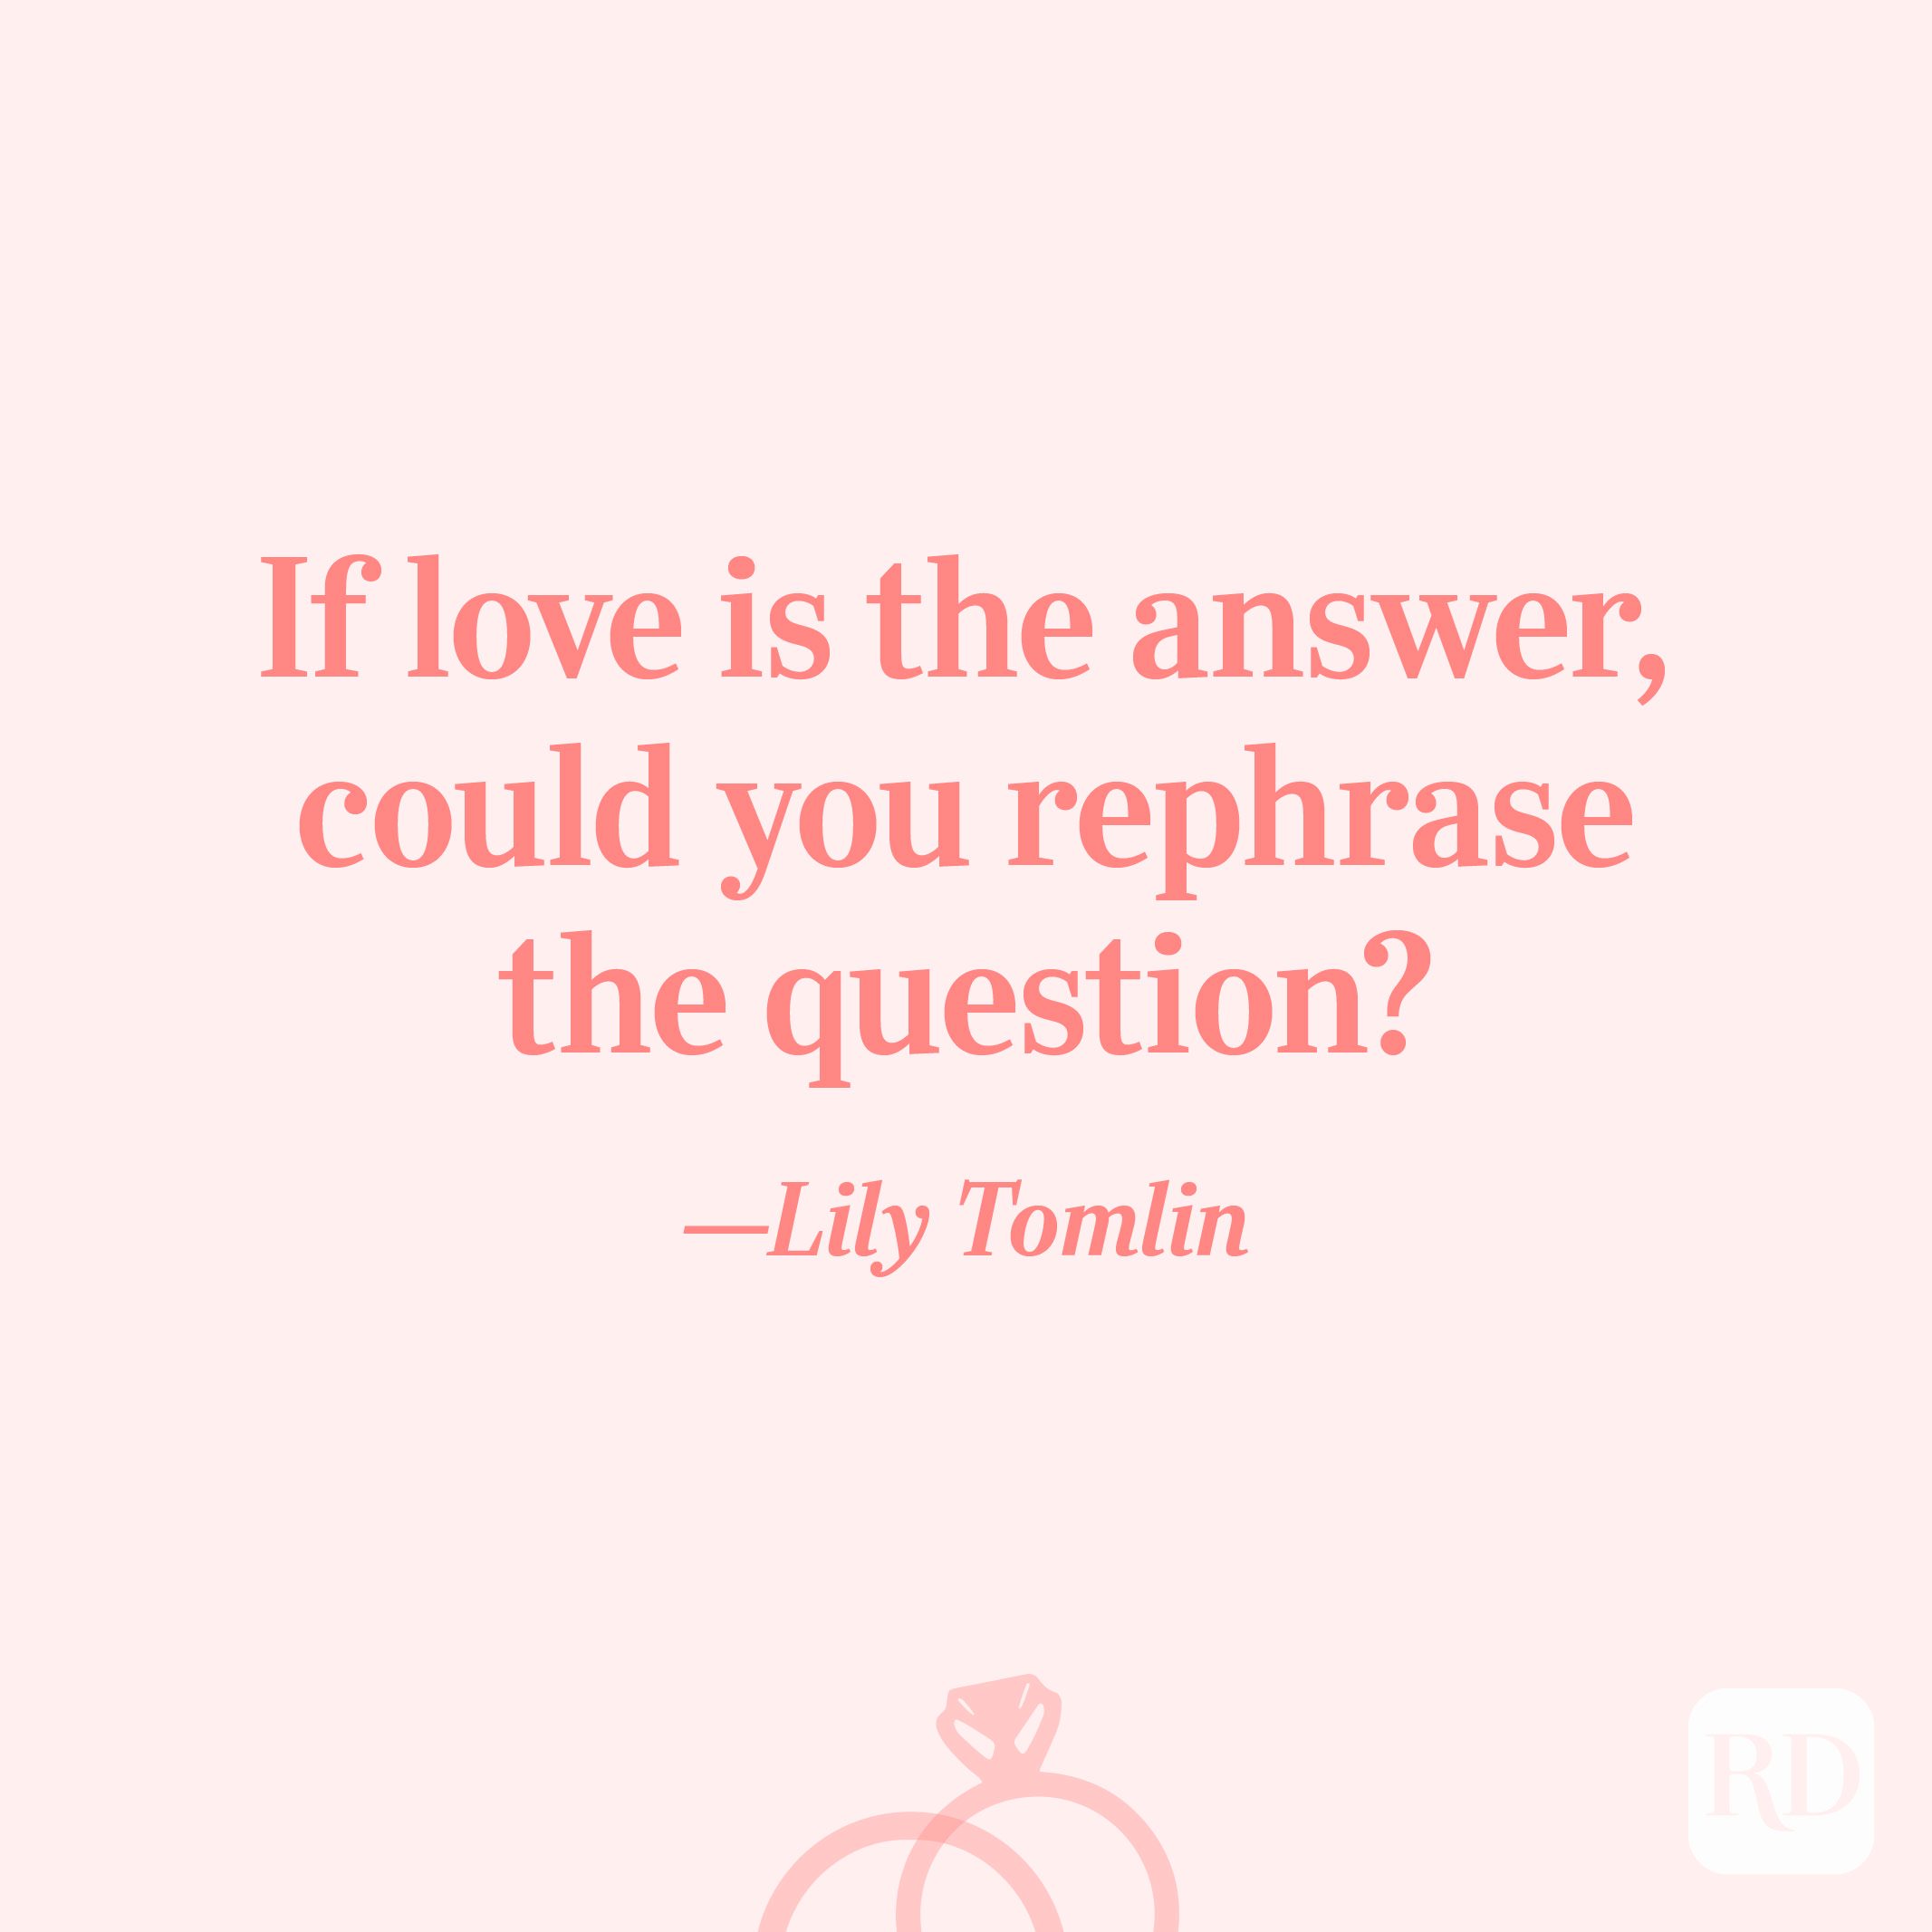 “If love is the answer, could you rephrase the question.”—Lily Tomlin